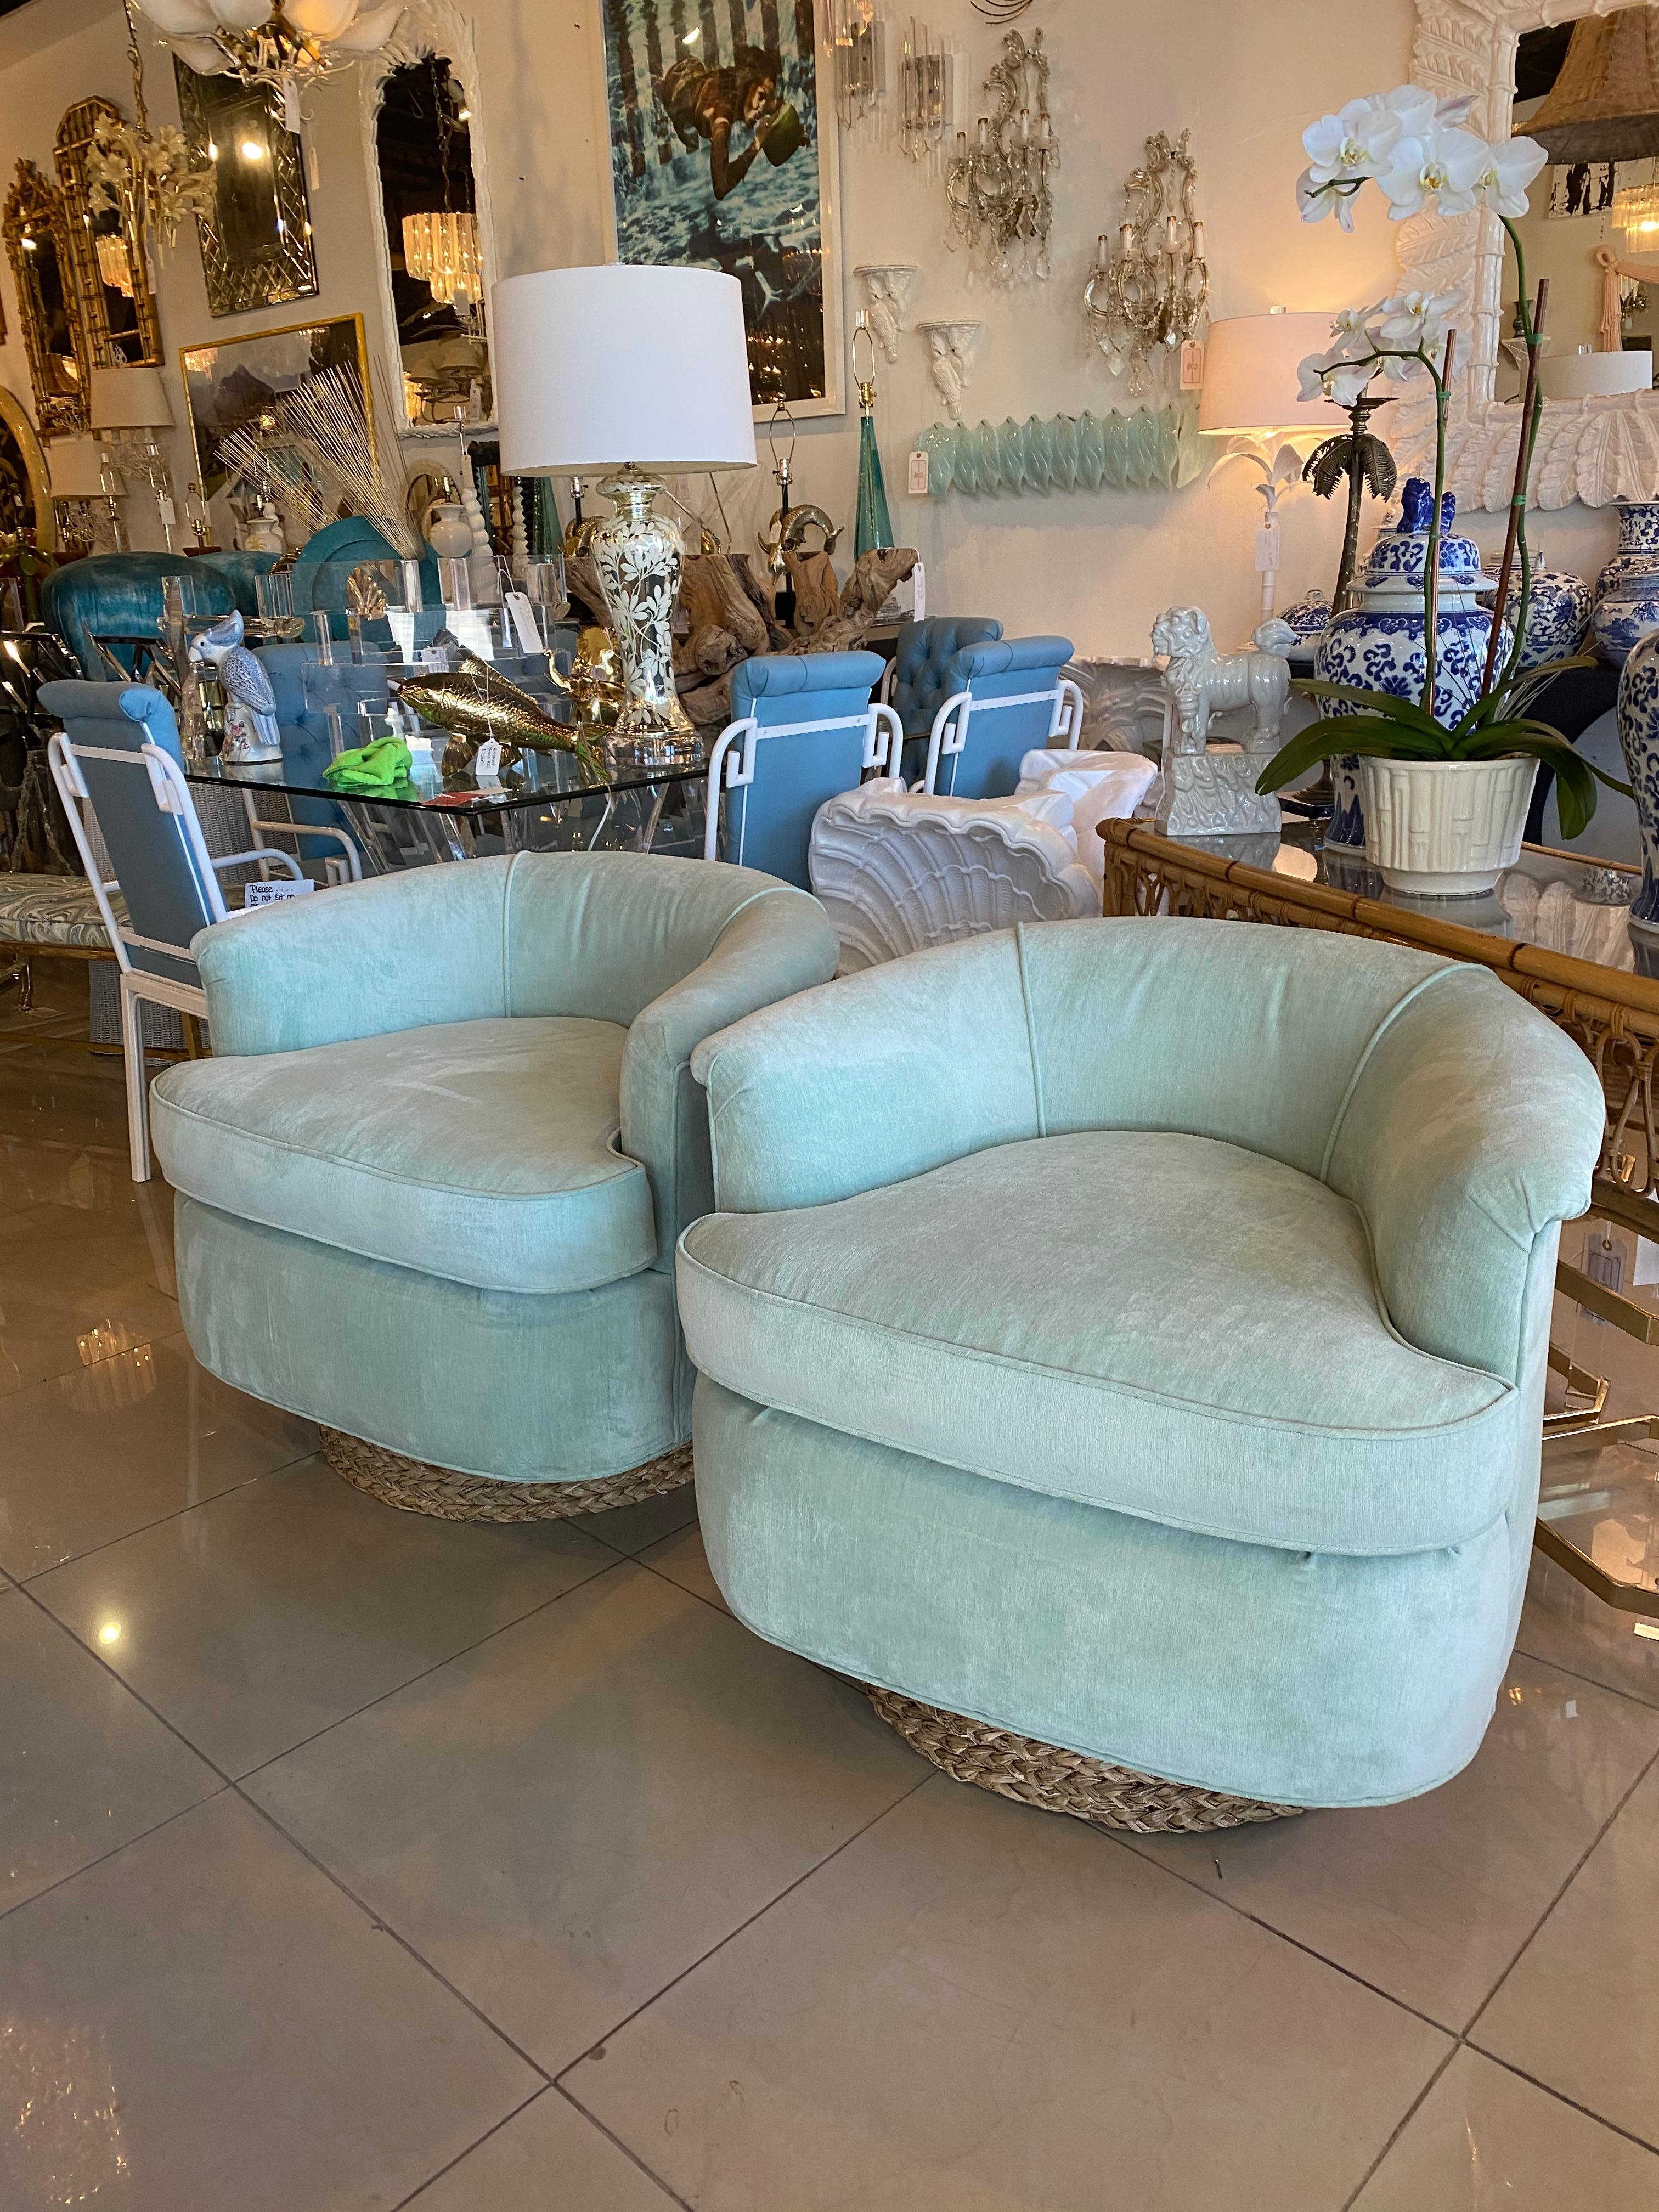 American Pair of Vintage Barrel Swivel Chairs Upholstered Seafoam Green Seagrass Base